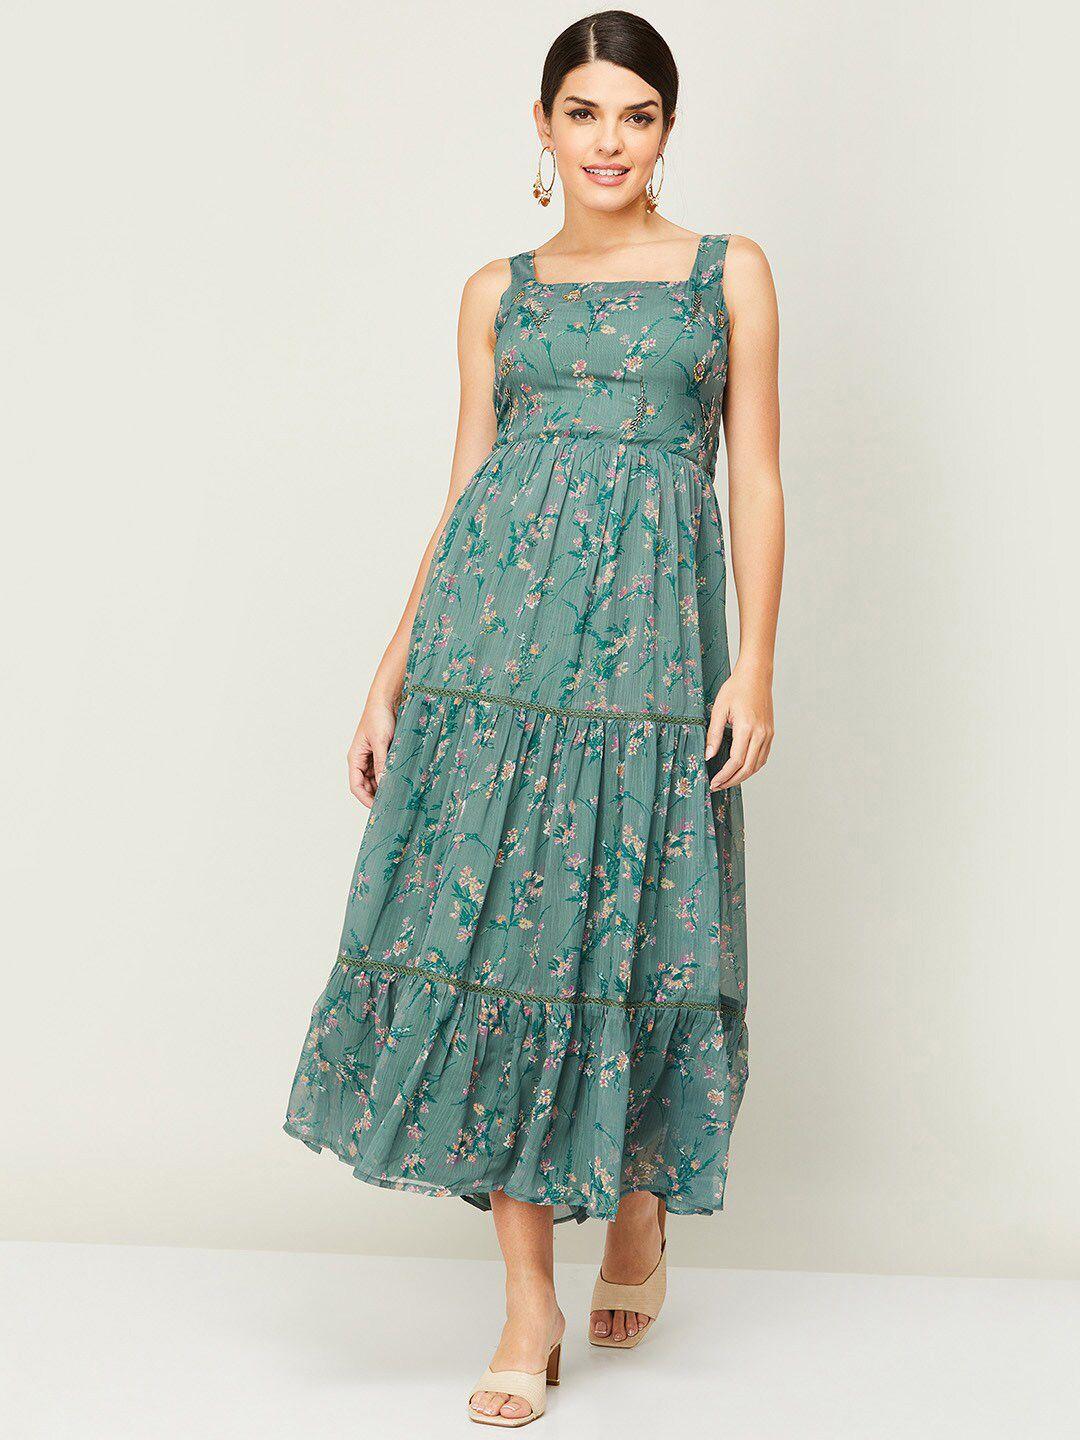 melange-by-lifestyle-floral-printed-tiered-midi-fit-&-flare-dress